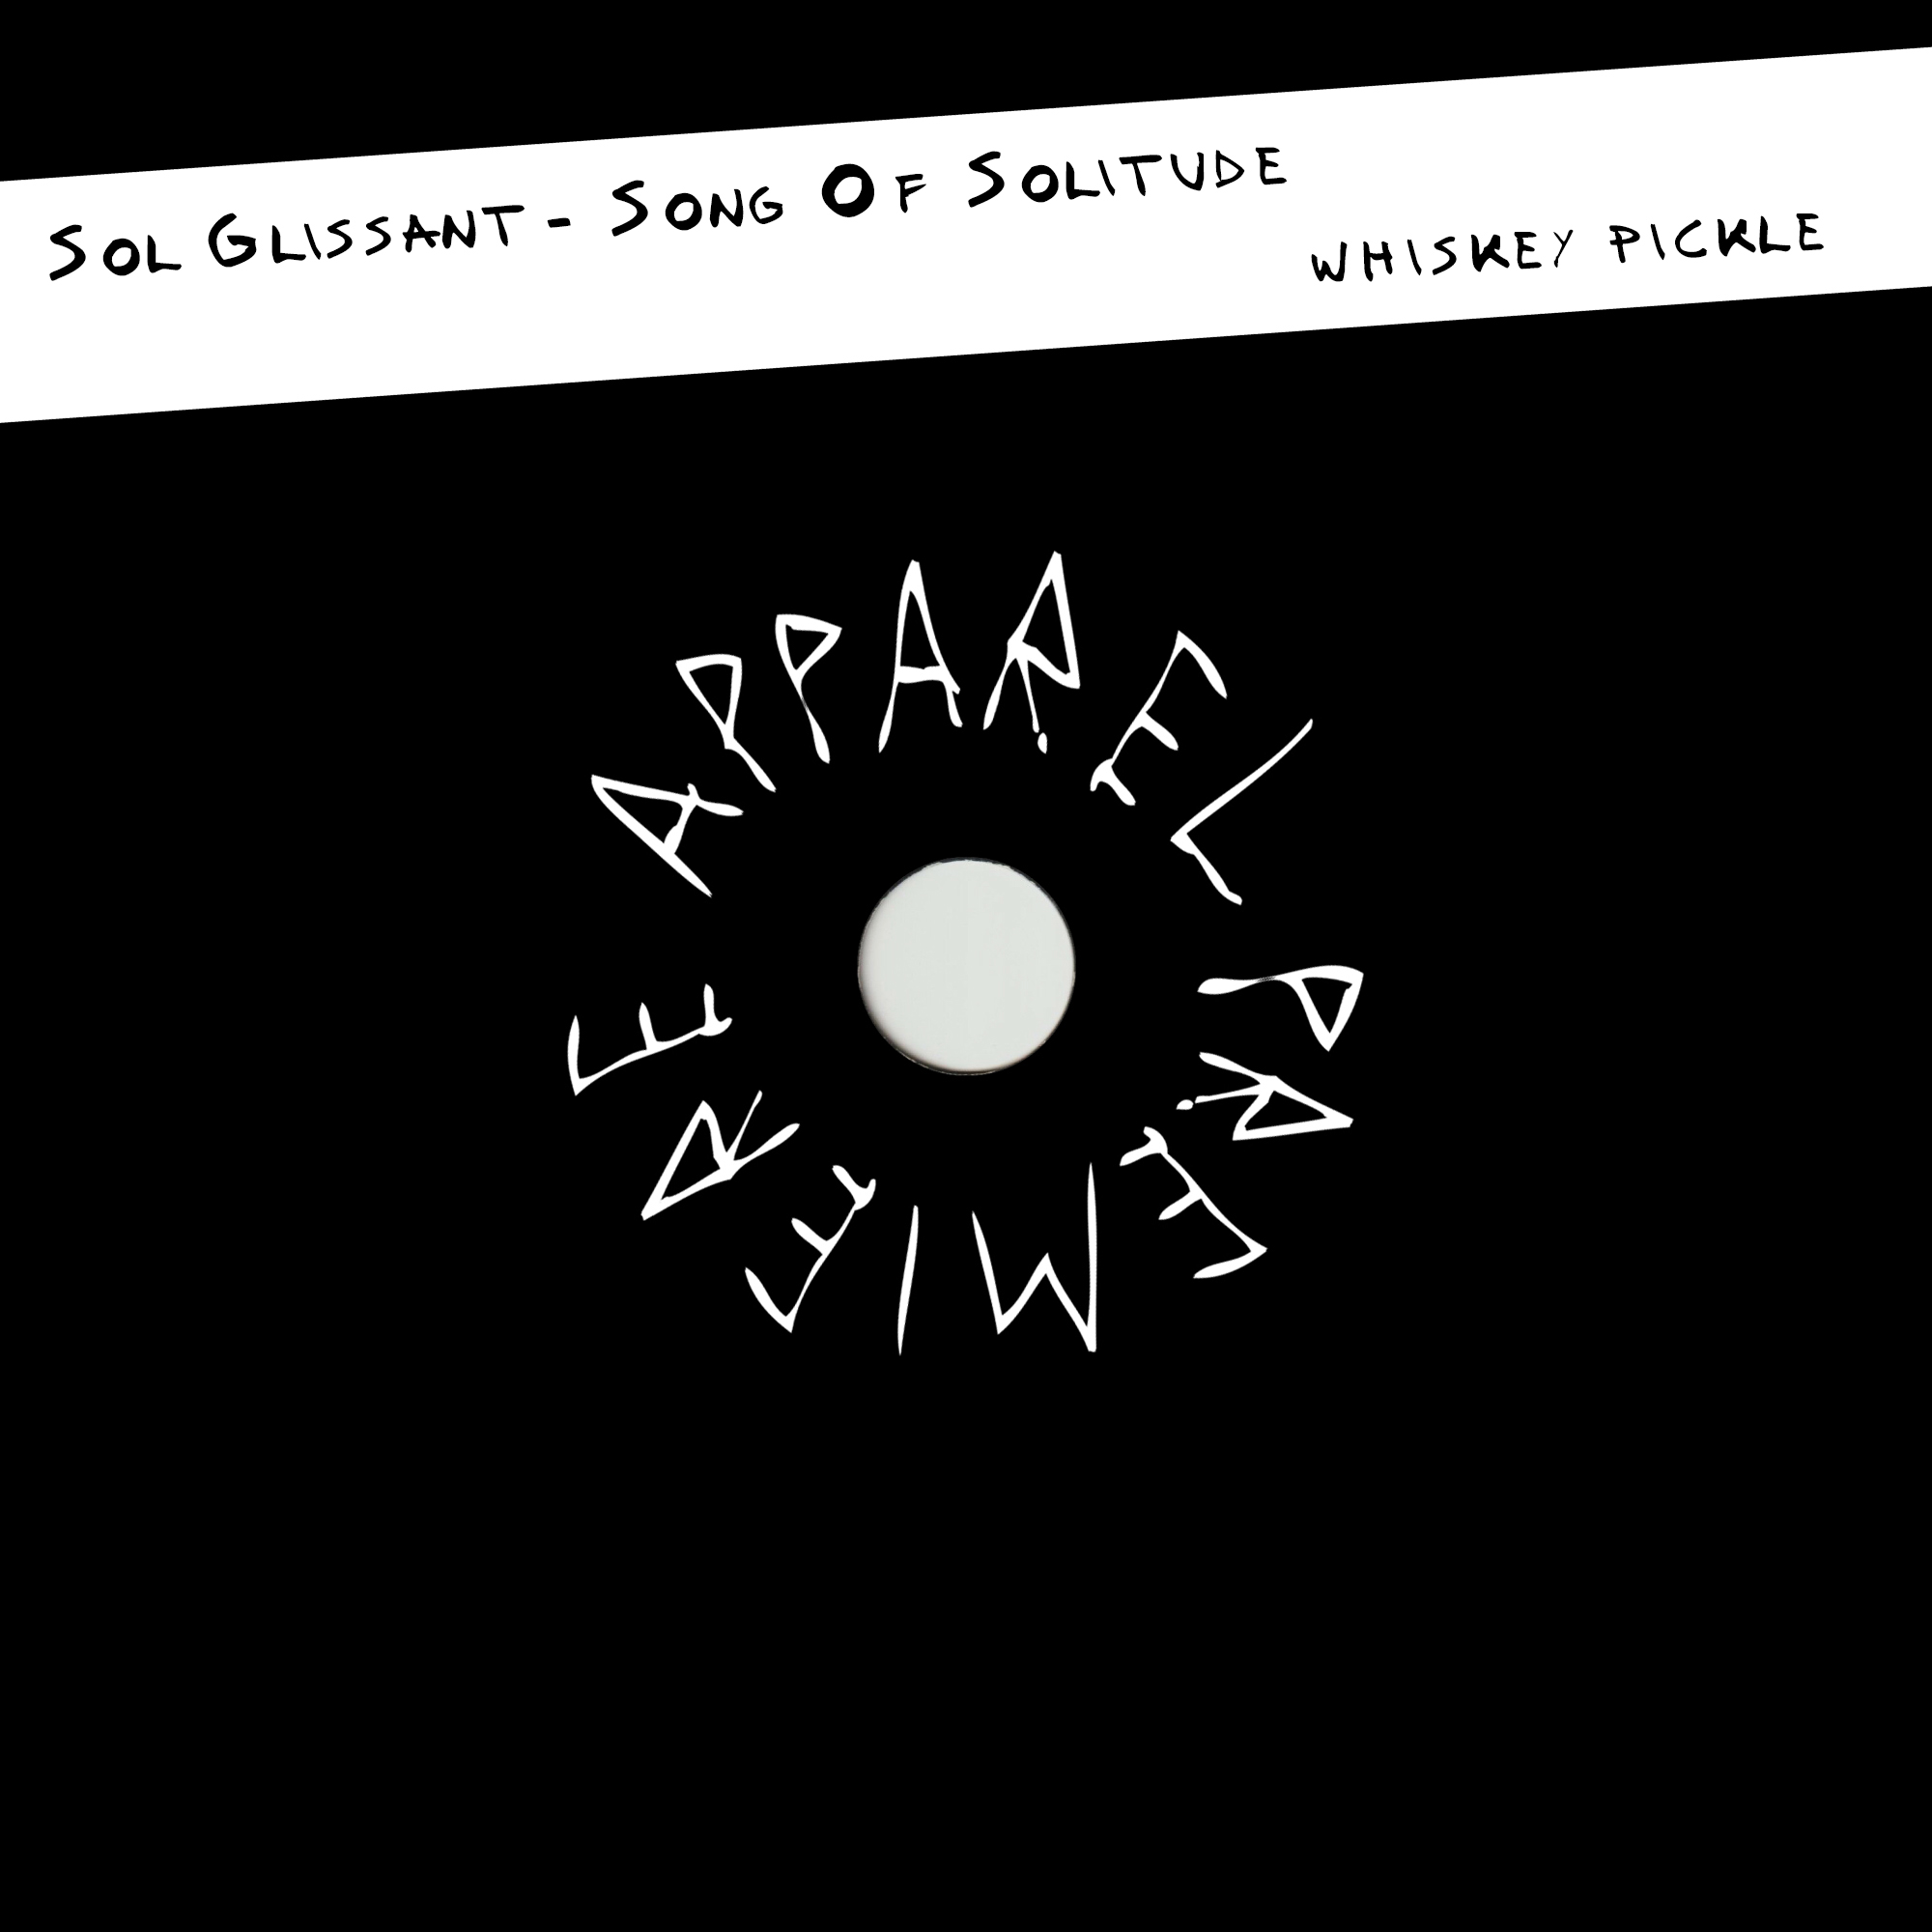 APPAREL PREMIERE Sol Glissant – Song Of Solitude [Whiskey Pickle]